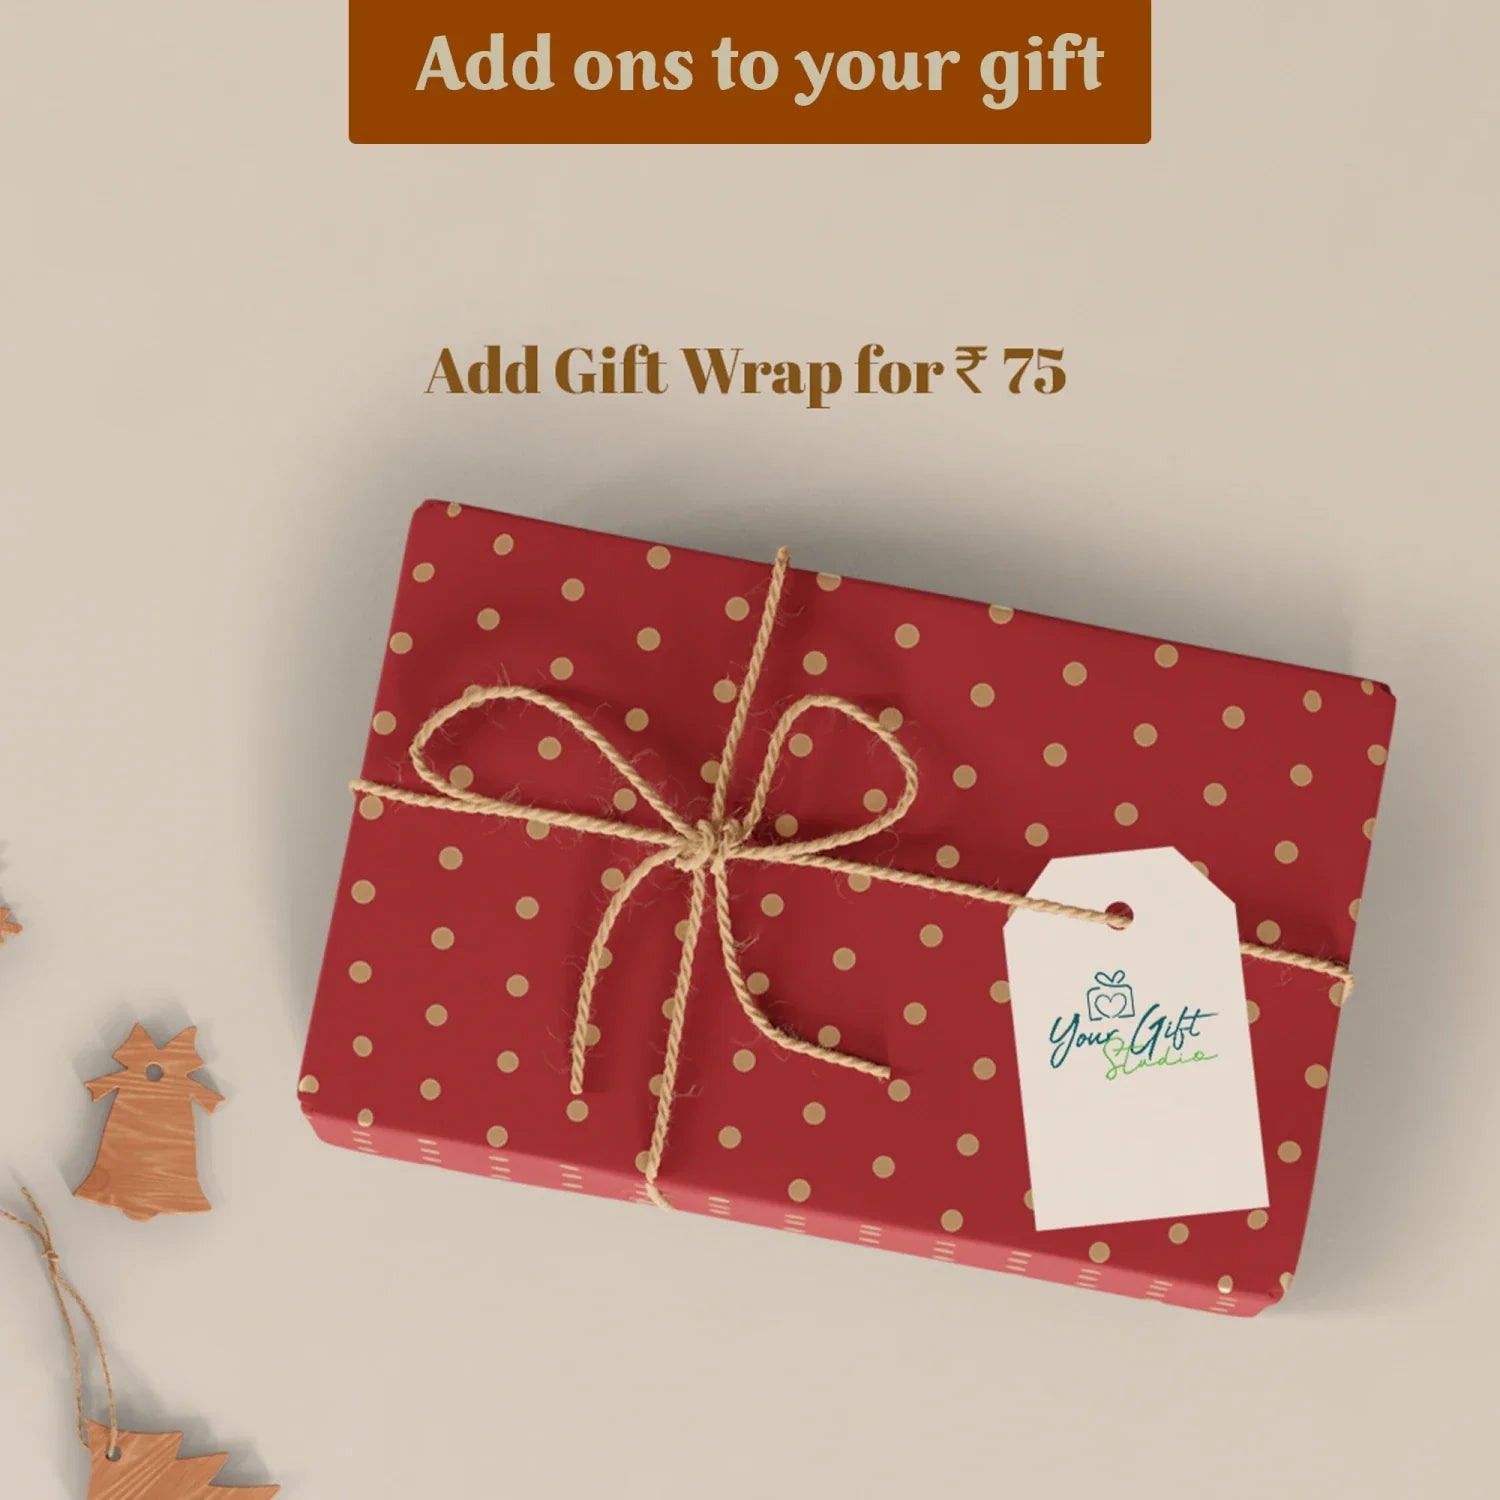 Wrap your personalized, close-to-heart gifts in a gift cover to make it look elegant and stylish.